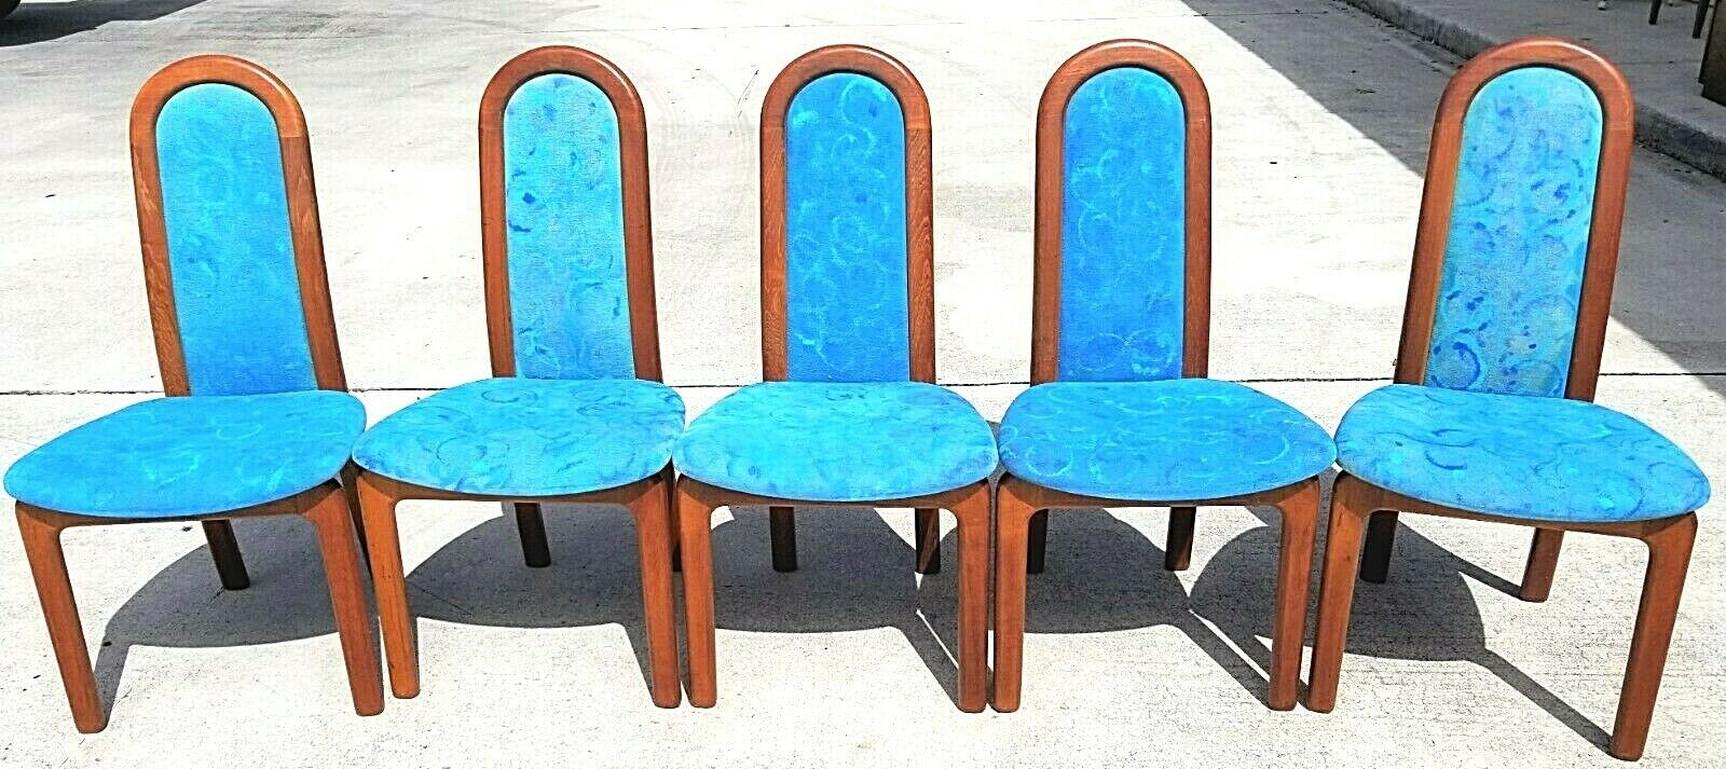 For FULL item description click on CONTINUE READING at the bottom of this page.

Offering one of our recent palm beach estate fine furniture acquisitions of a
Set of 5 Vintage MCM Skovby Møbelfabrik Solid Teak Dining Chairs Denmark 1960s

We also